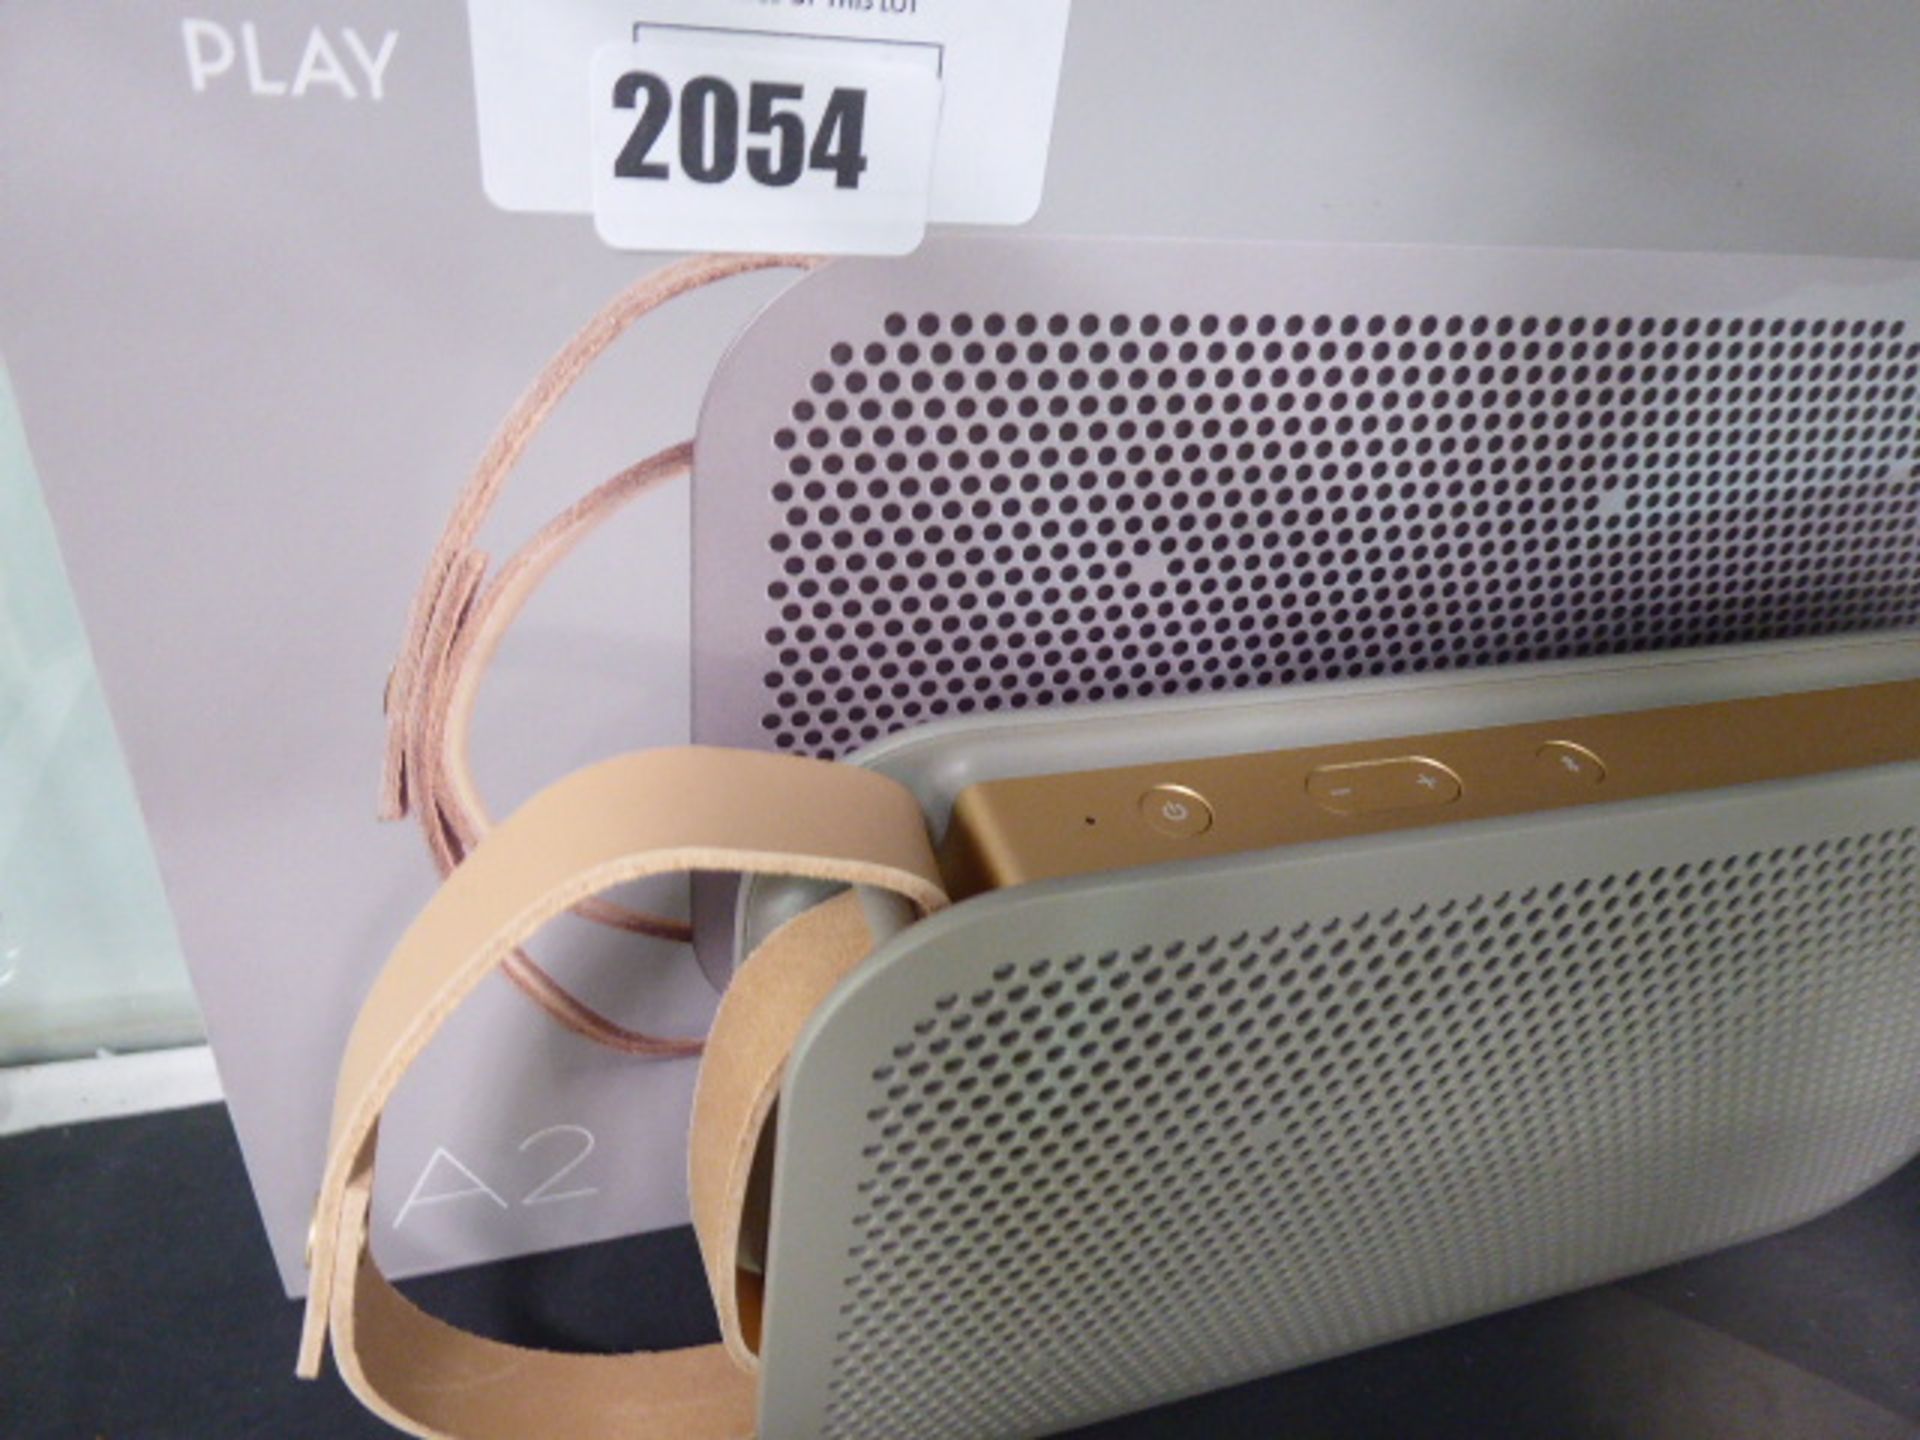 Bang & Olufsen Beoplay A2 portable bluetooth speaker with box - Image 2 of 2